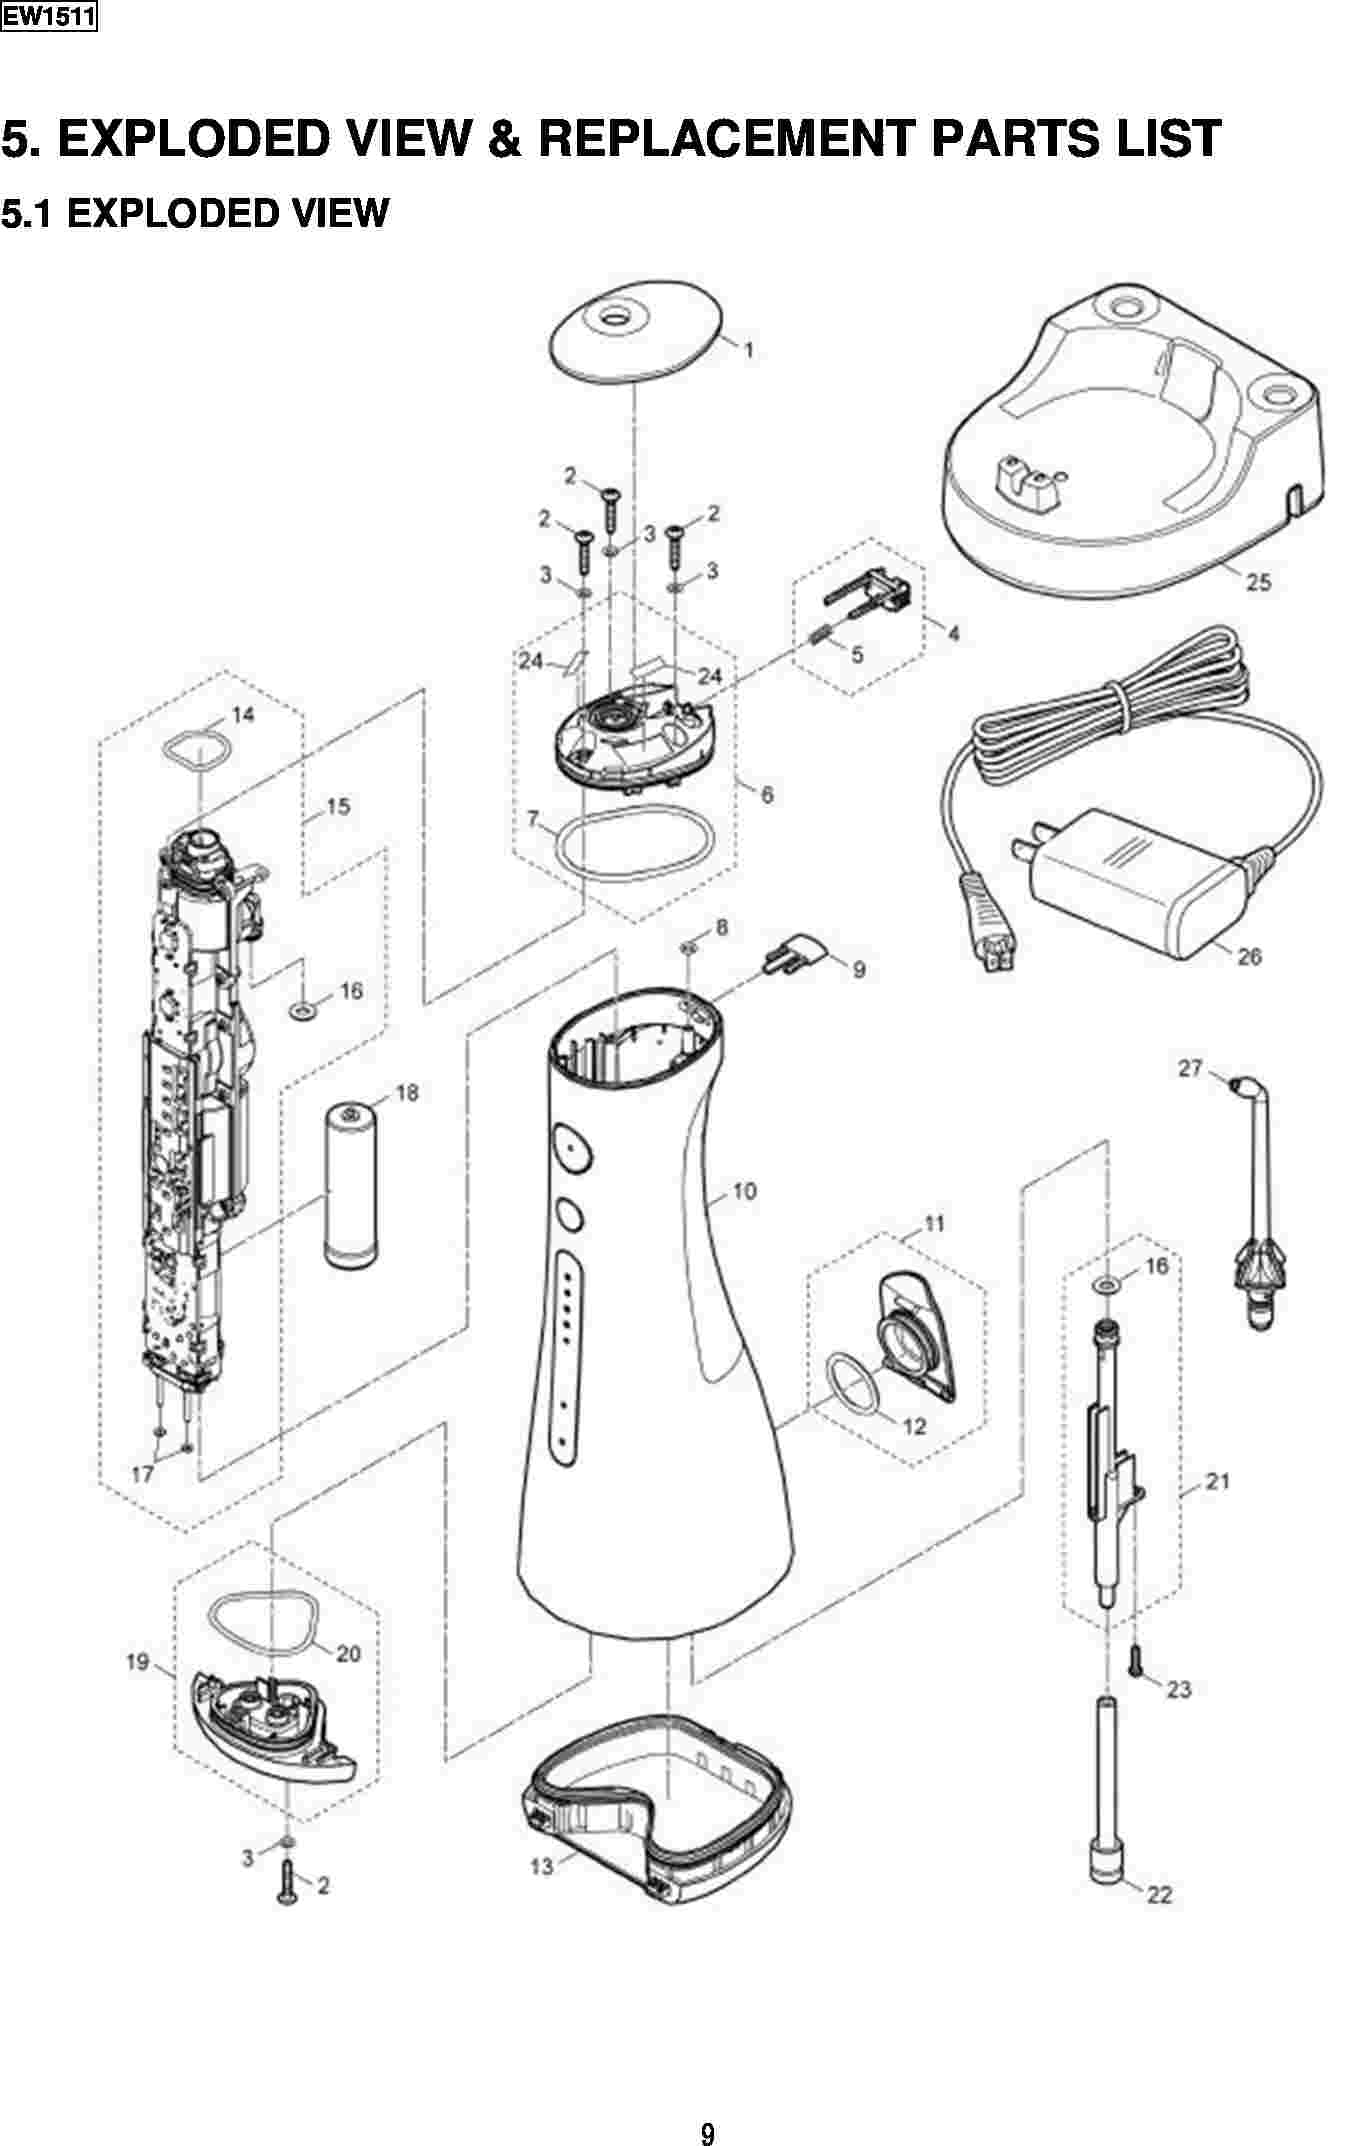 EW-1511: Exploded View